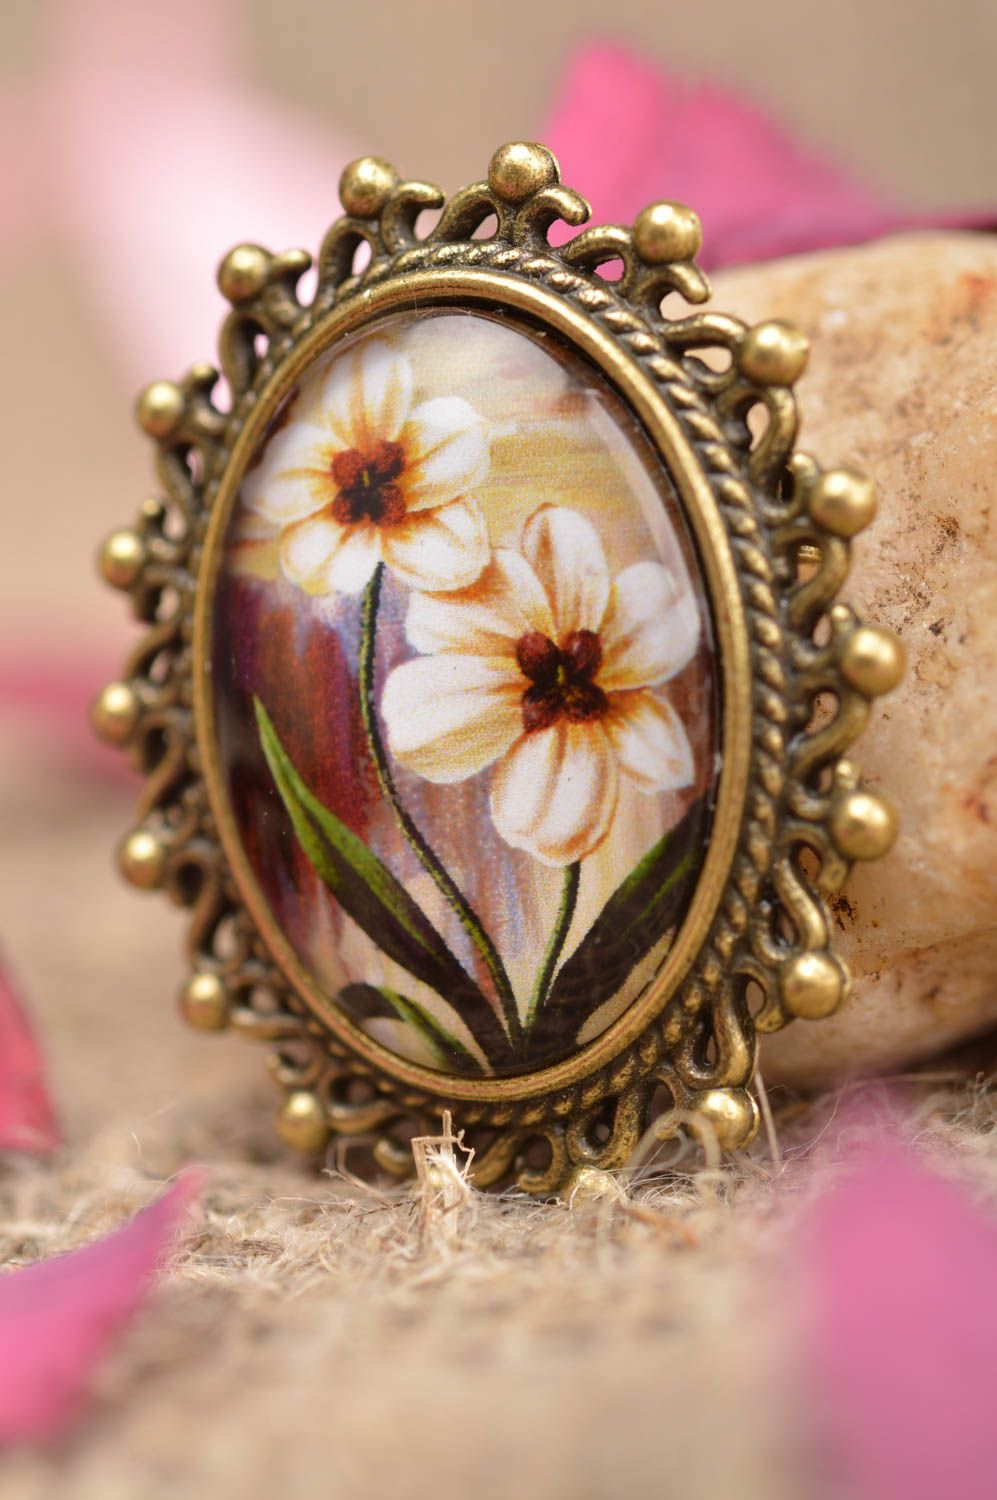 Handmade beautiful oval brooch in vintage style with flowers in dark shades photo 1